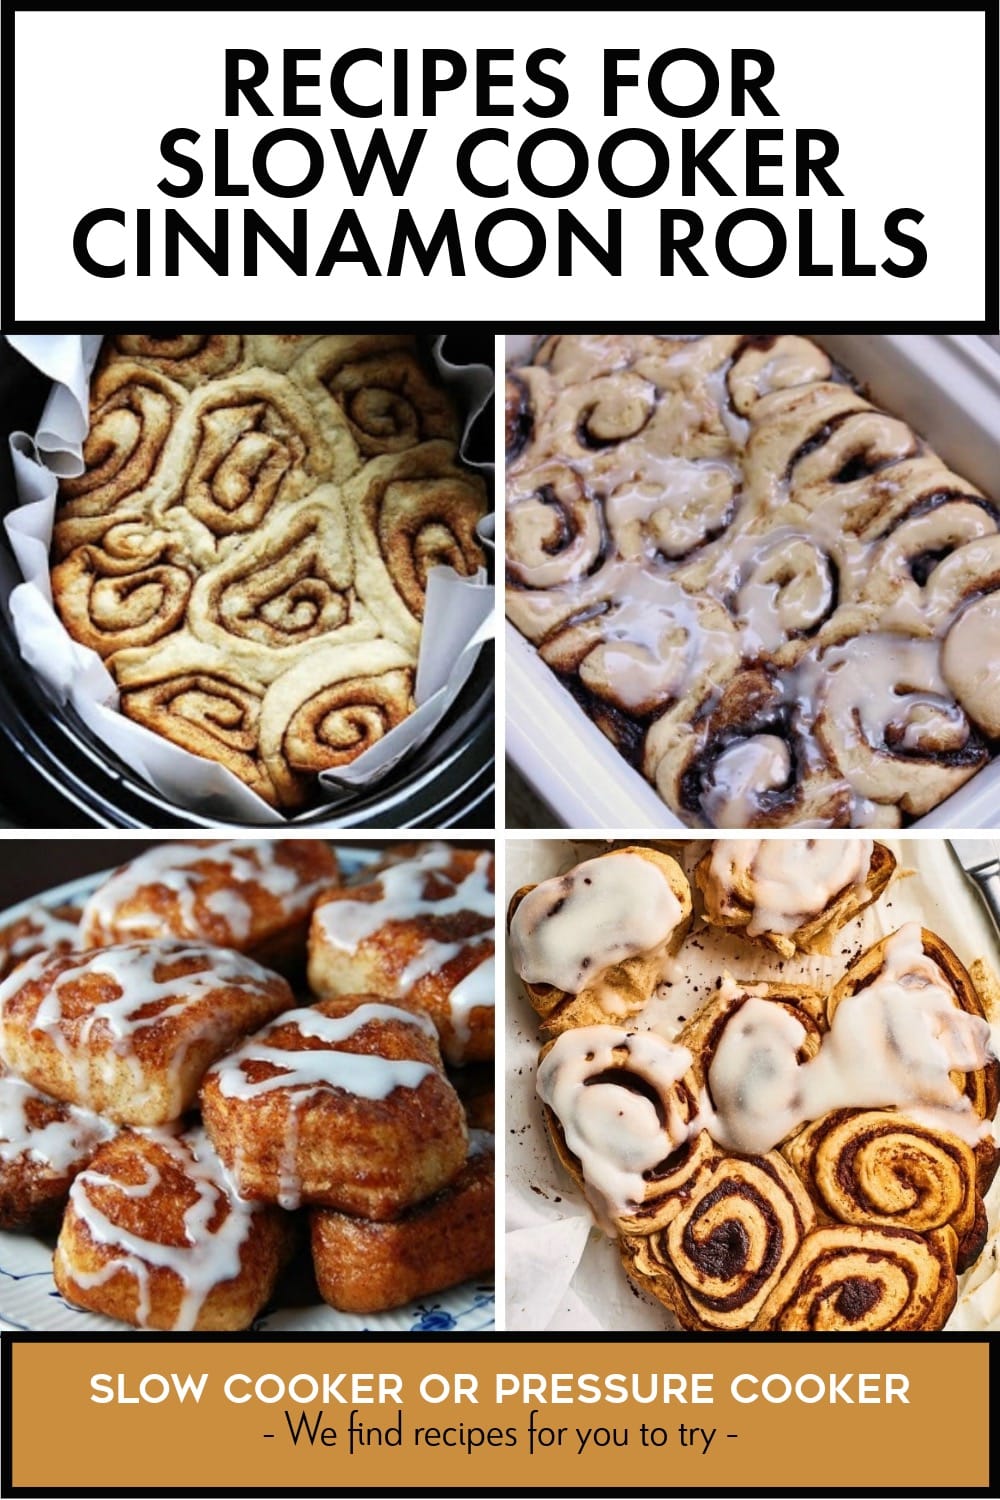 Pinterest image of Recipes for Slow Cooker Cinnamon Rolls